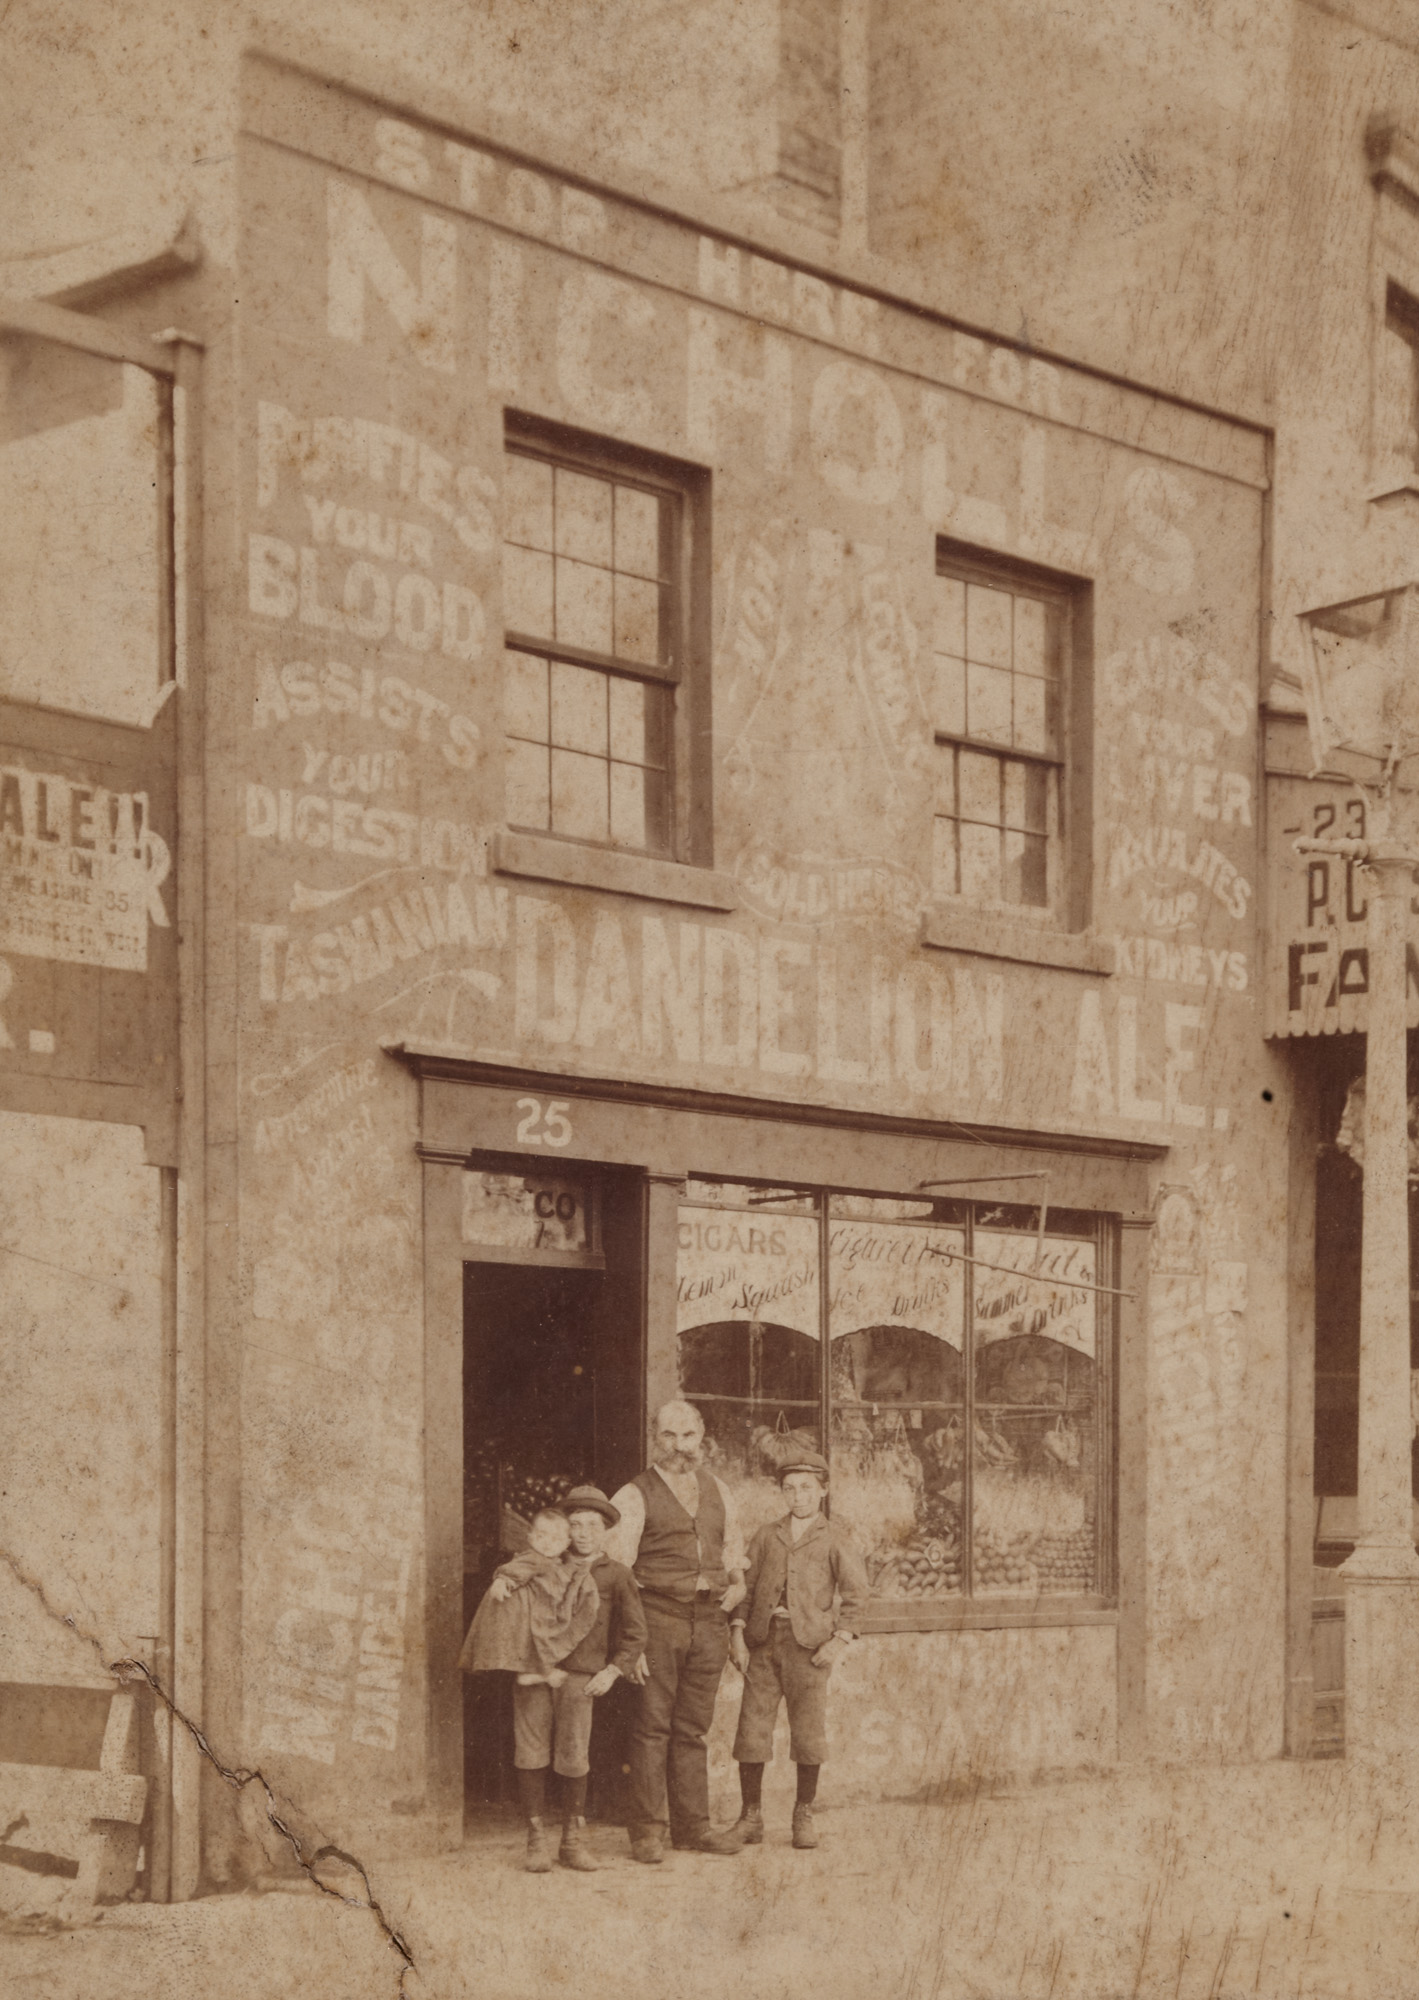 Man with two young boys, one holding an infant, outside a shop, probably in George Street West, Sydney, ca.1898 / Wall Bros. Photographers